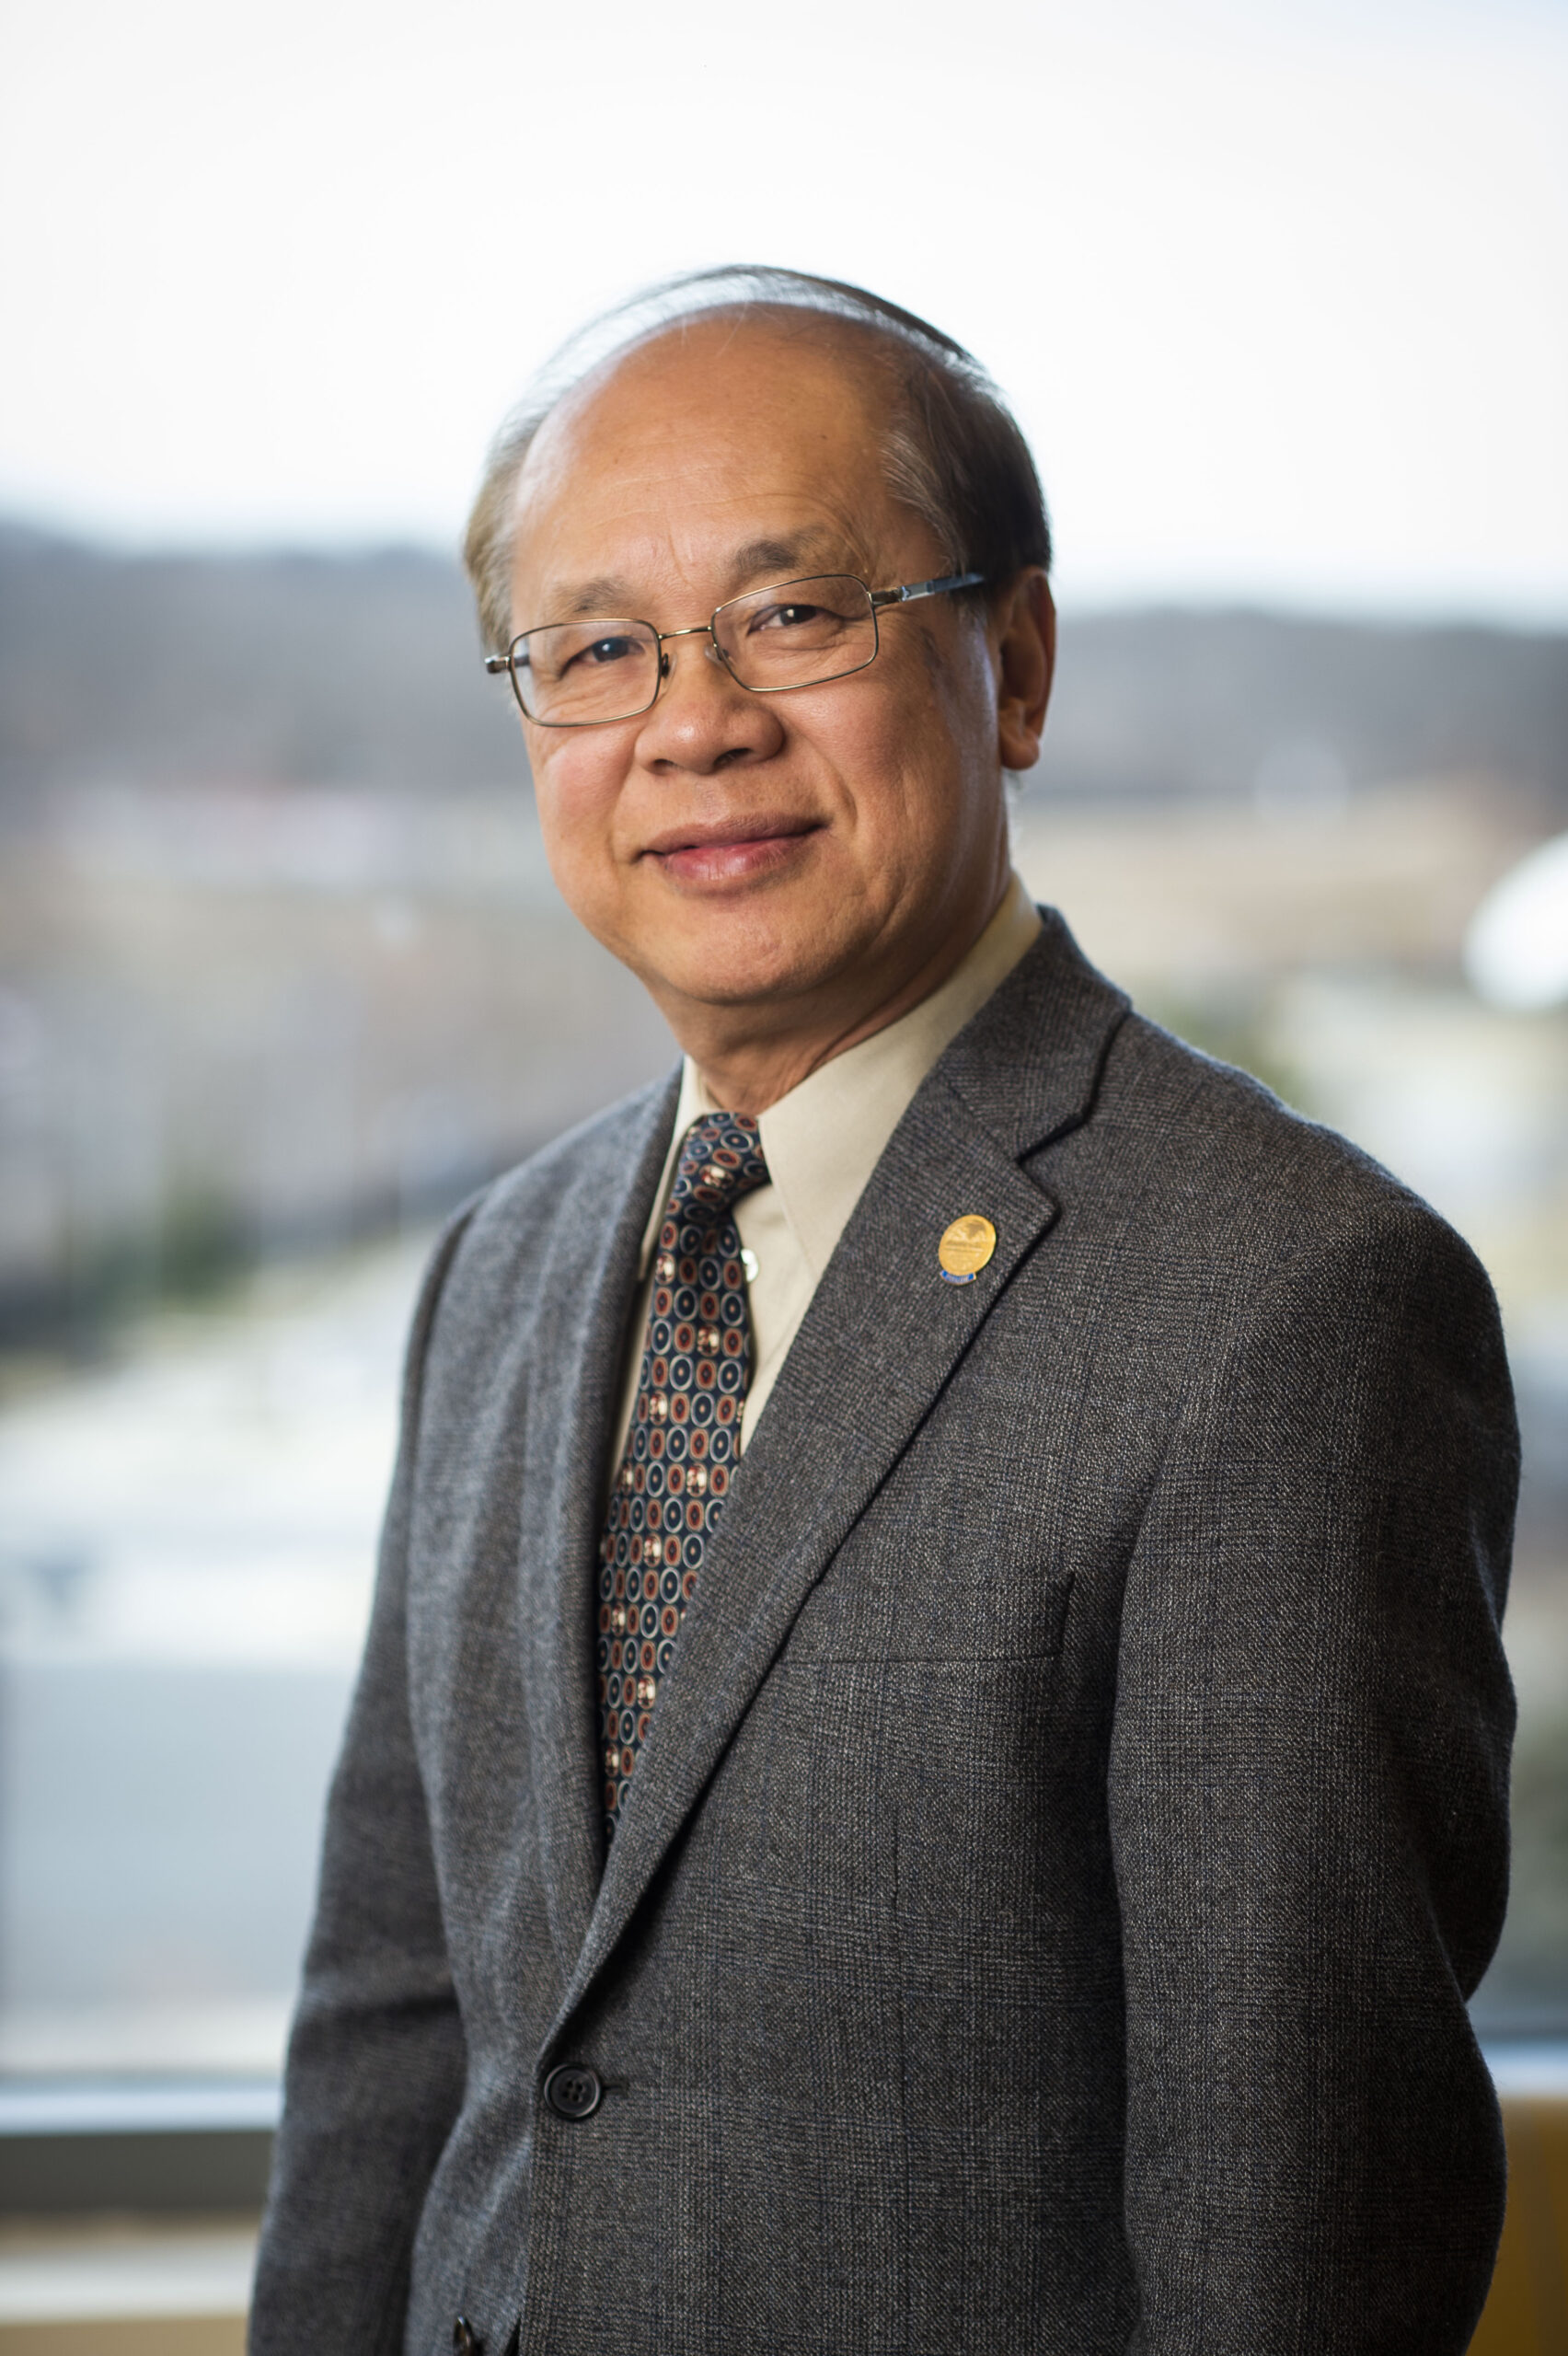 Dr. Lau, wearing a smart suit, smiles to the camera